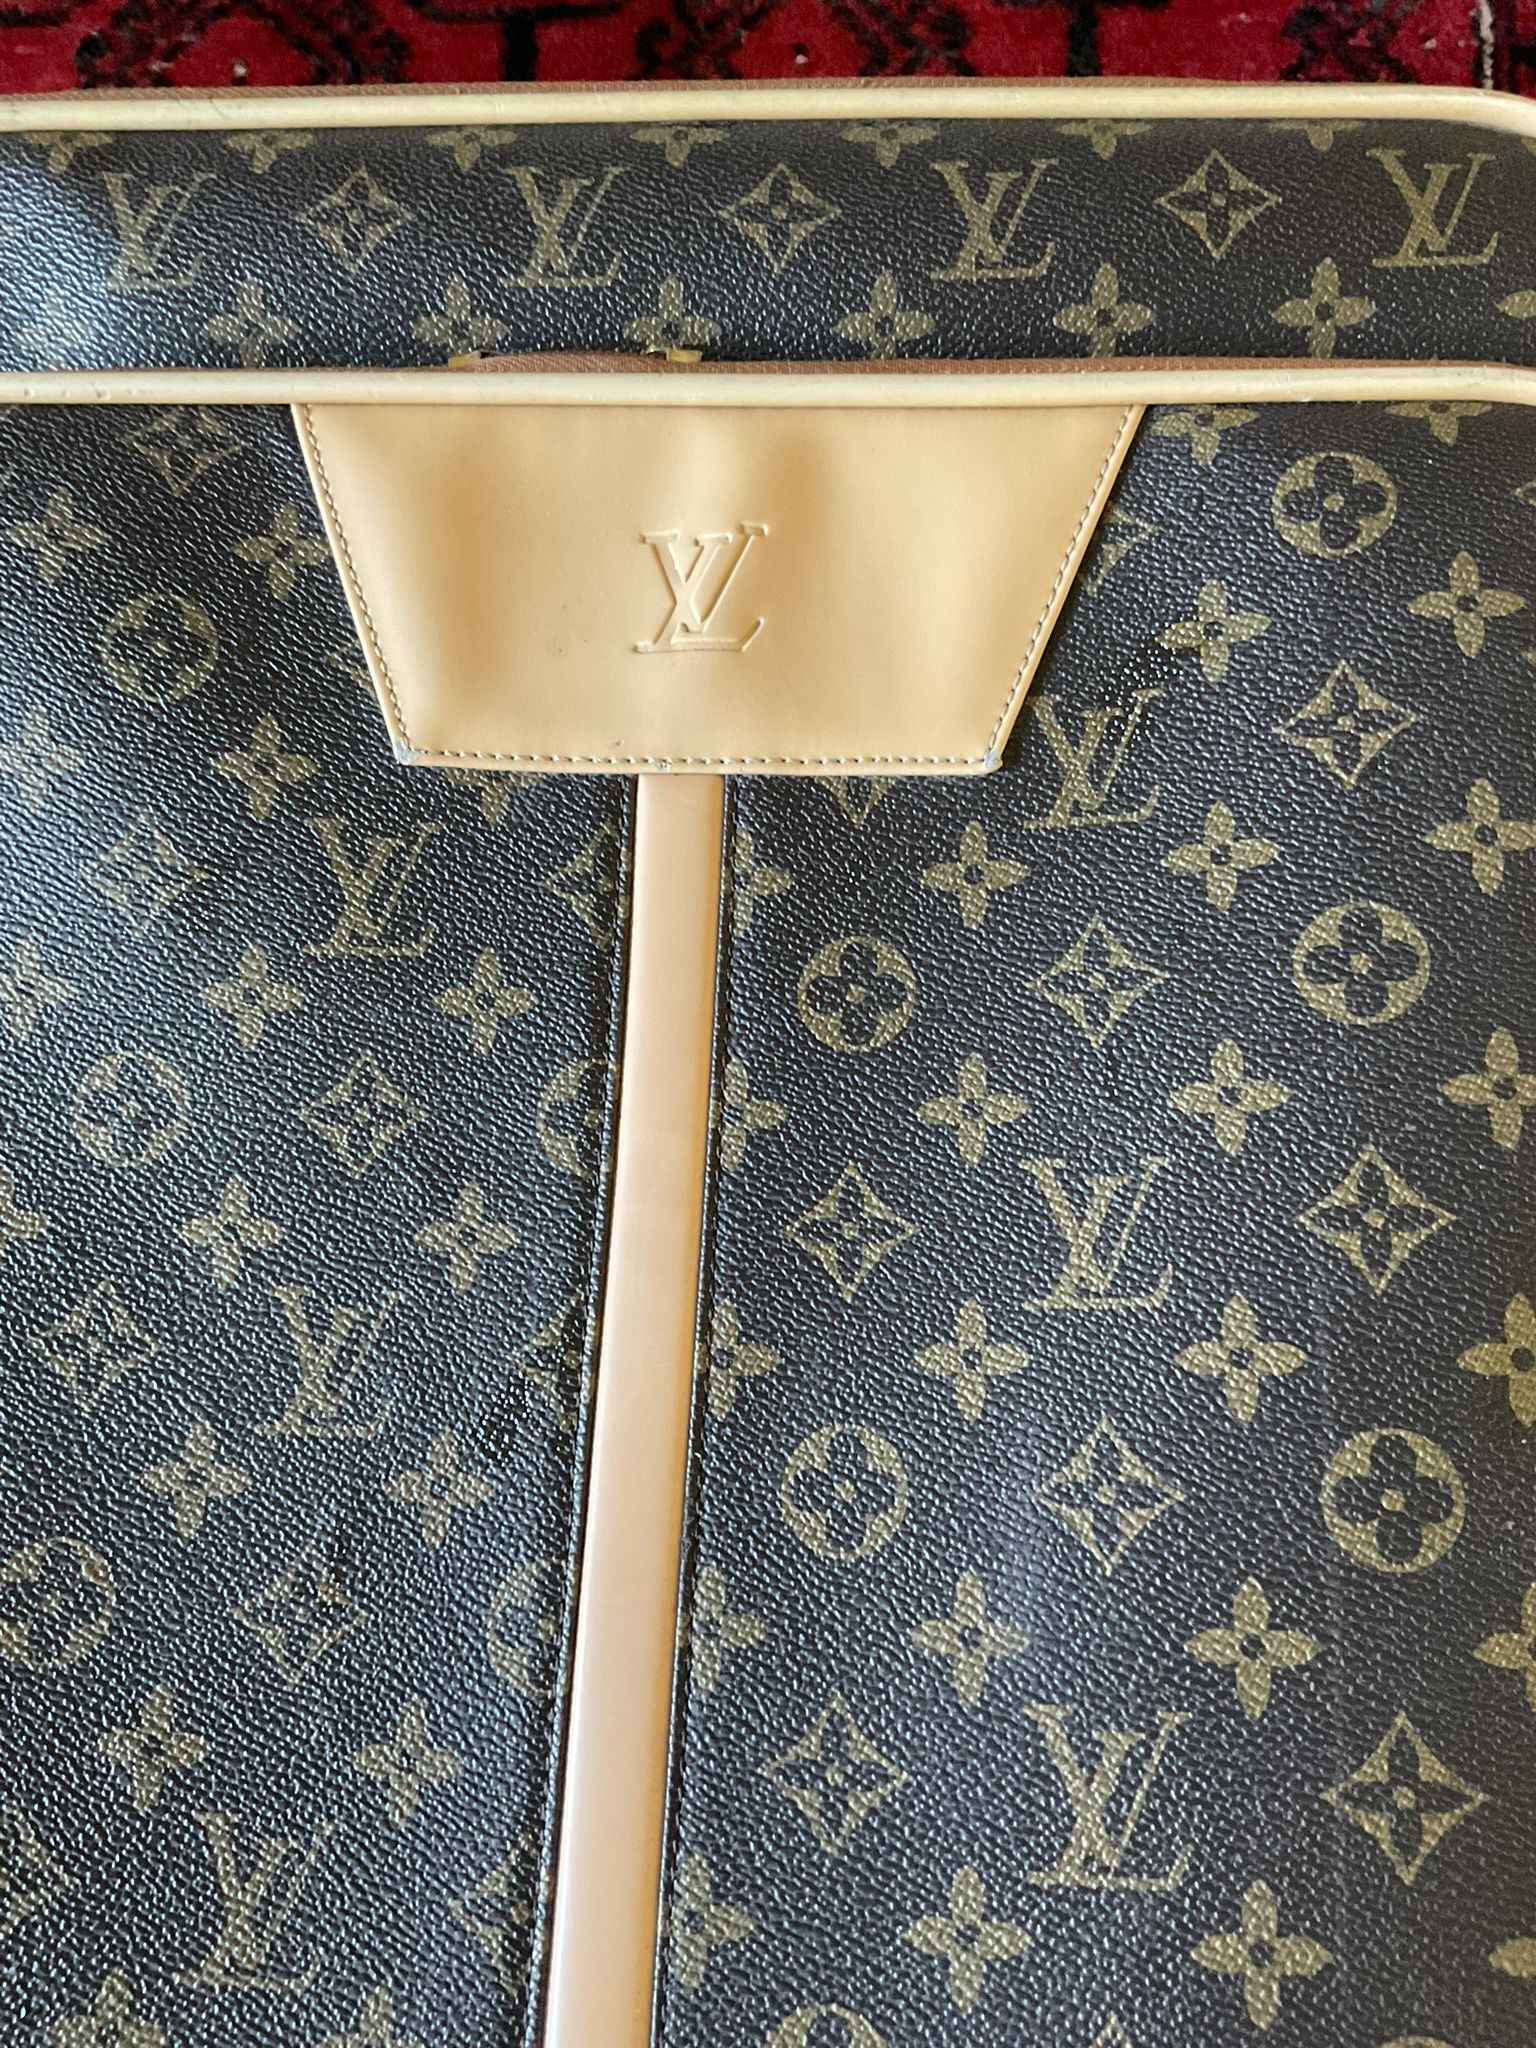 Authentic Louis Vuitton Carry On Luggage Bag for Sale in Phoenix, AZ -  OfferUp